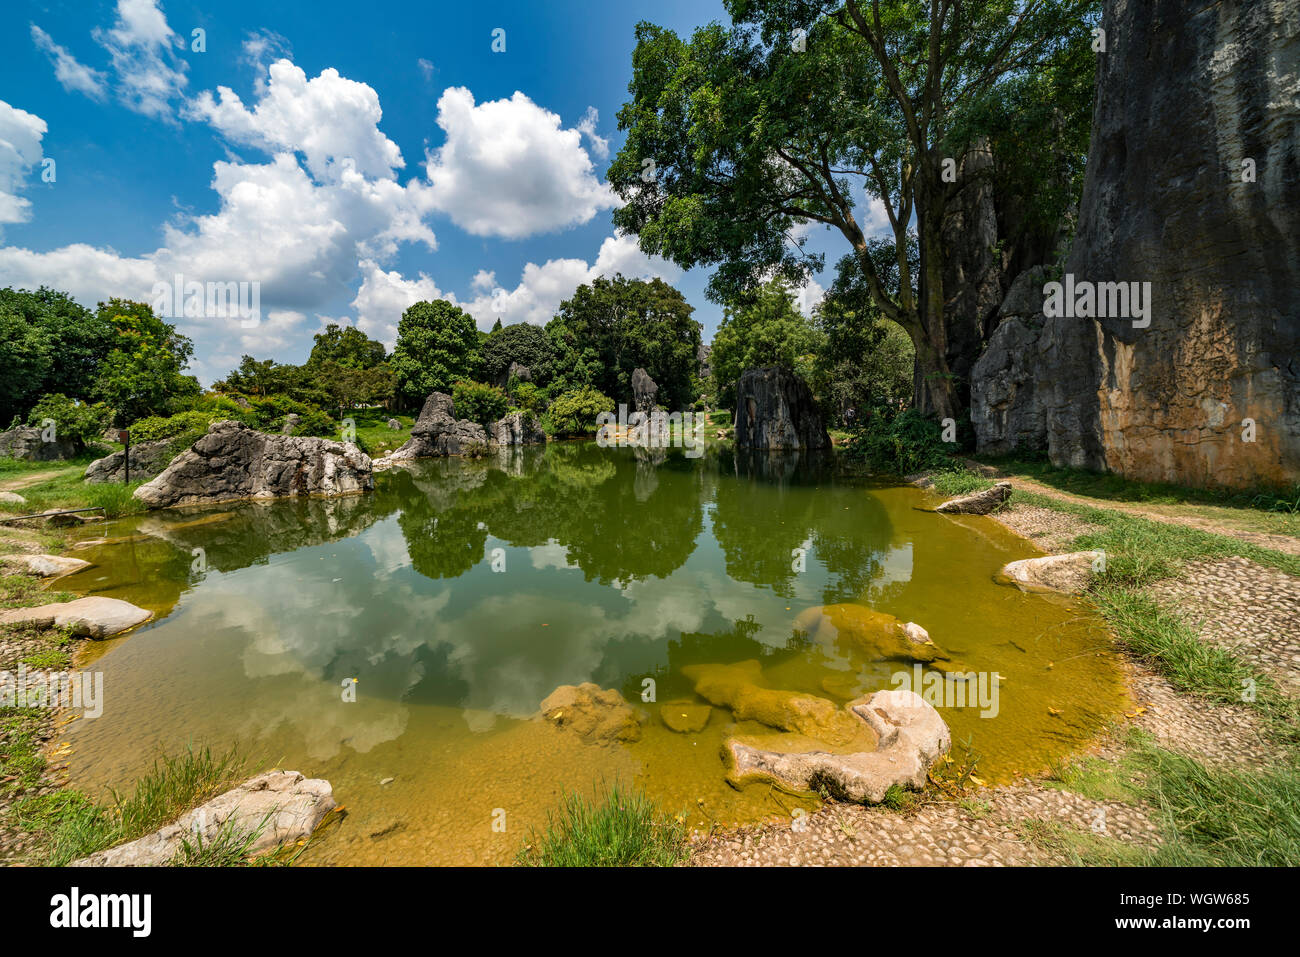 The Stone forest in Kunming, China Stock Photo